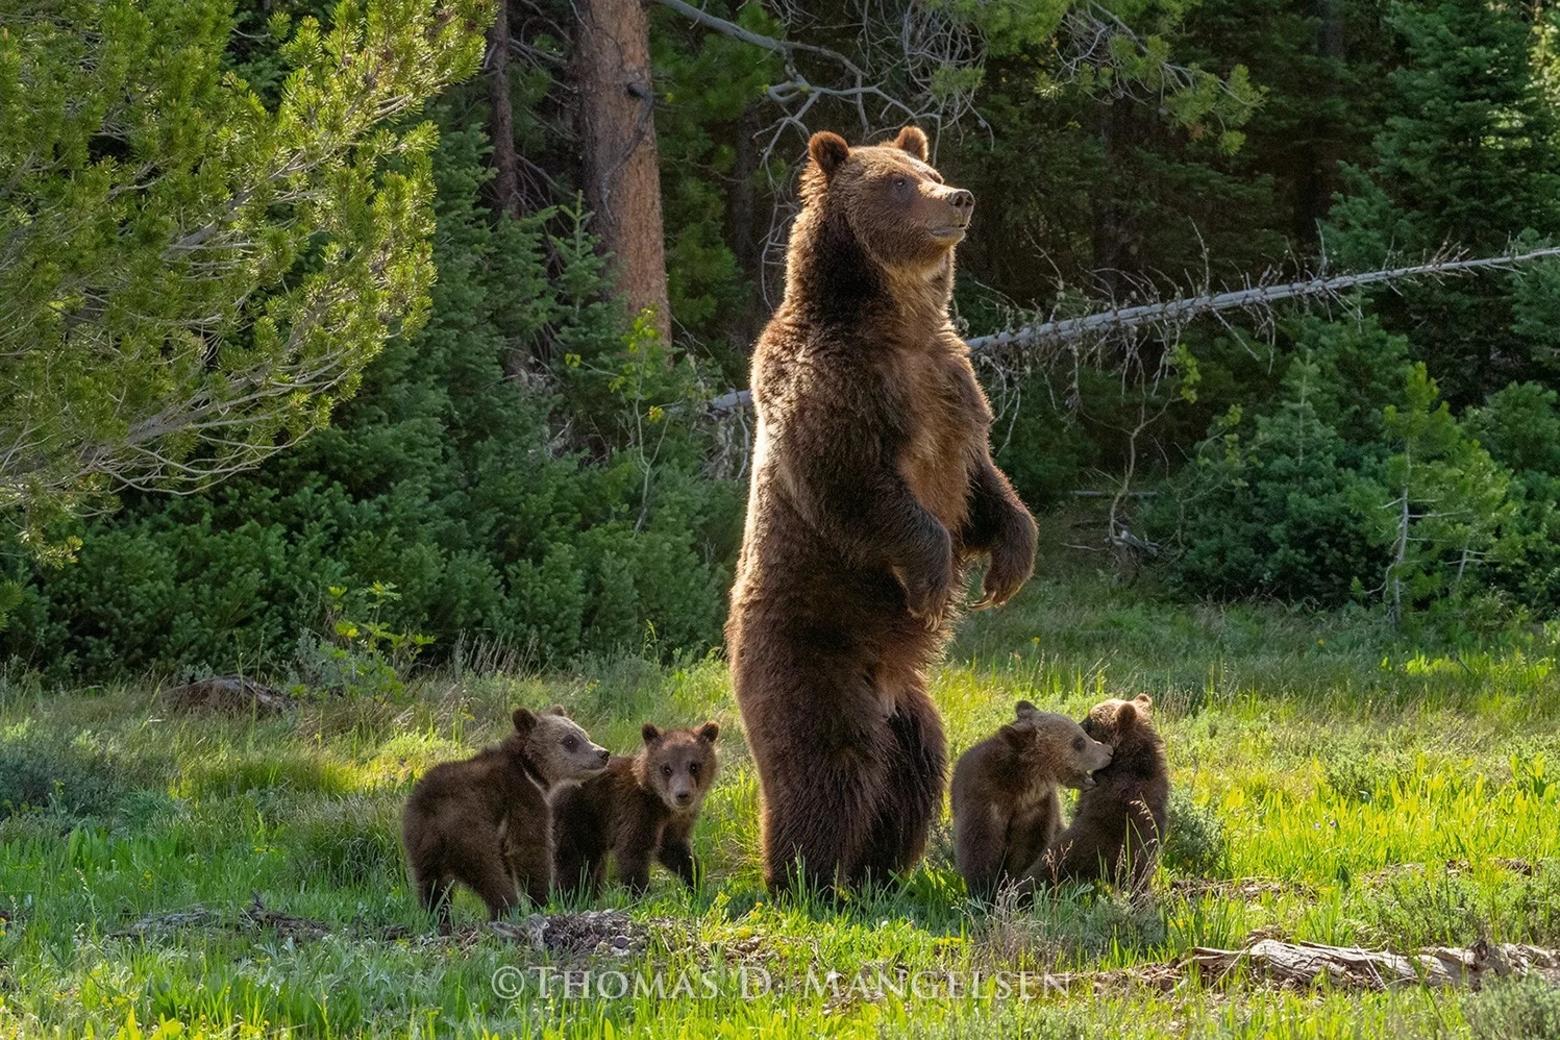 In 2020, world-famous Grizzly 399 emerged from hibernation with four cubs, astounding her fans and wildlife biologists alike. She was 25 years old. This image graces the cover of Thomas Mangelsen's new book, "Grizzly 399: The World's Most Famous Mother Bear." Photo by Thomas D. Mangelsen